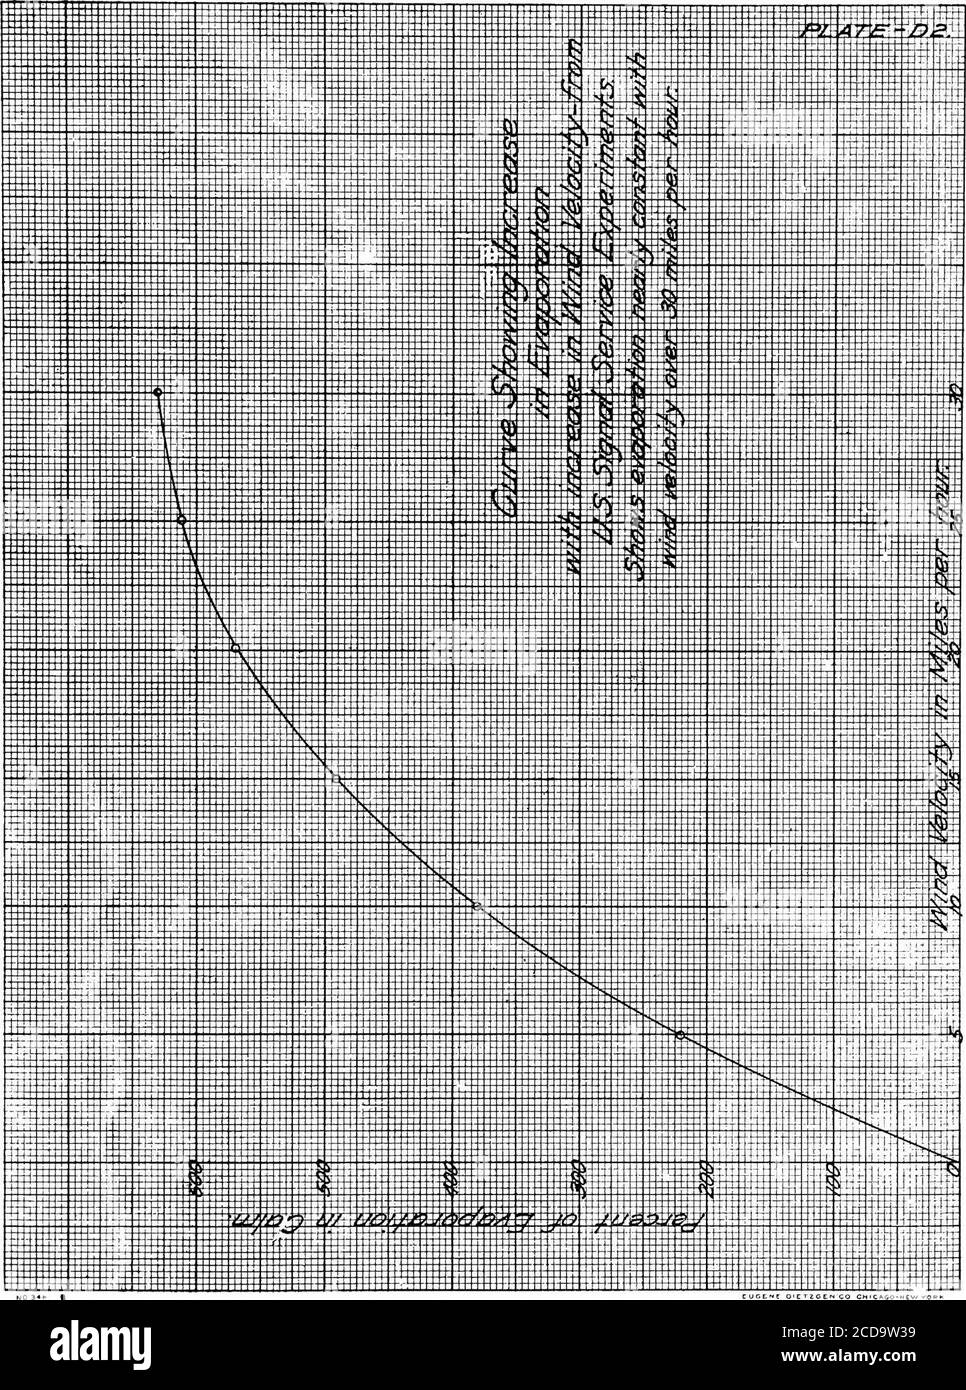 . The future water supply of San Francisco; a report to the Honorable the secretary of the interior and the Advisory board of engineers of the United States army . ervice on evaporation and wind velocity.These experiments were made with the air at atemperature of 84° and a relative humidity of50^r, by whirling Piches Hygrometers at vary-ing velocities on an arm 28 feet in length. Theevaporation was found to be 2.2 times as greatwith a velocity of 5 miles as in a calm, 3.8 timesat 10 miles, 4.9 times at 15 miles, 5.7 times at 20miles, 6.1 times at 25 miles and 6.3 times at 30miles an hour. Thes Stock Photo